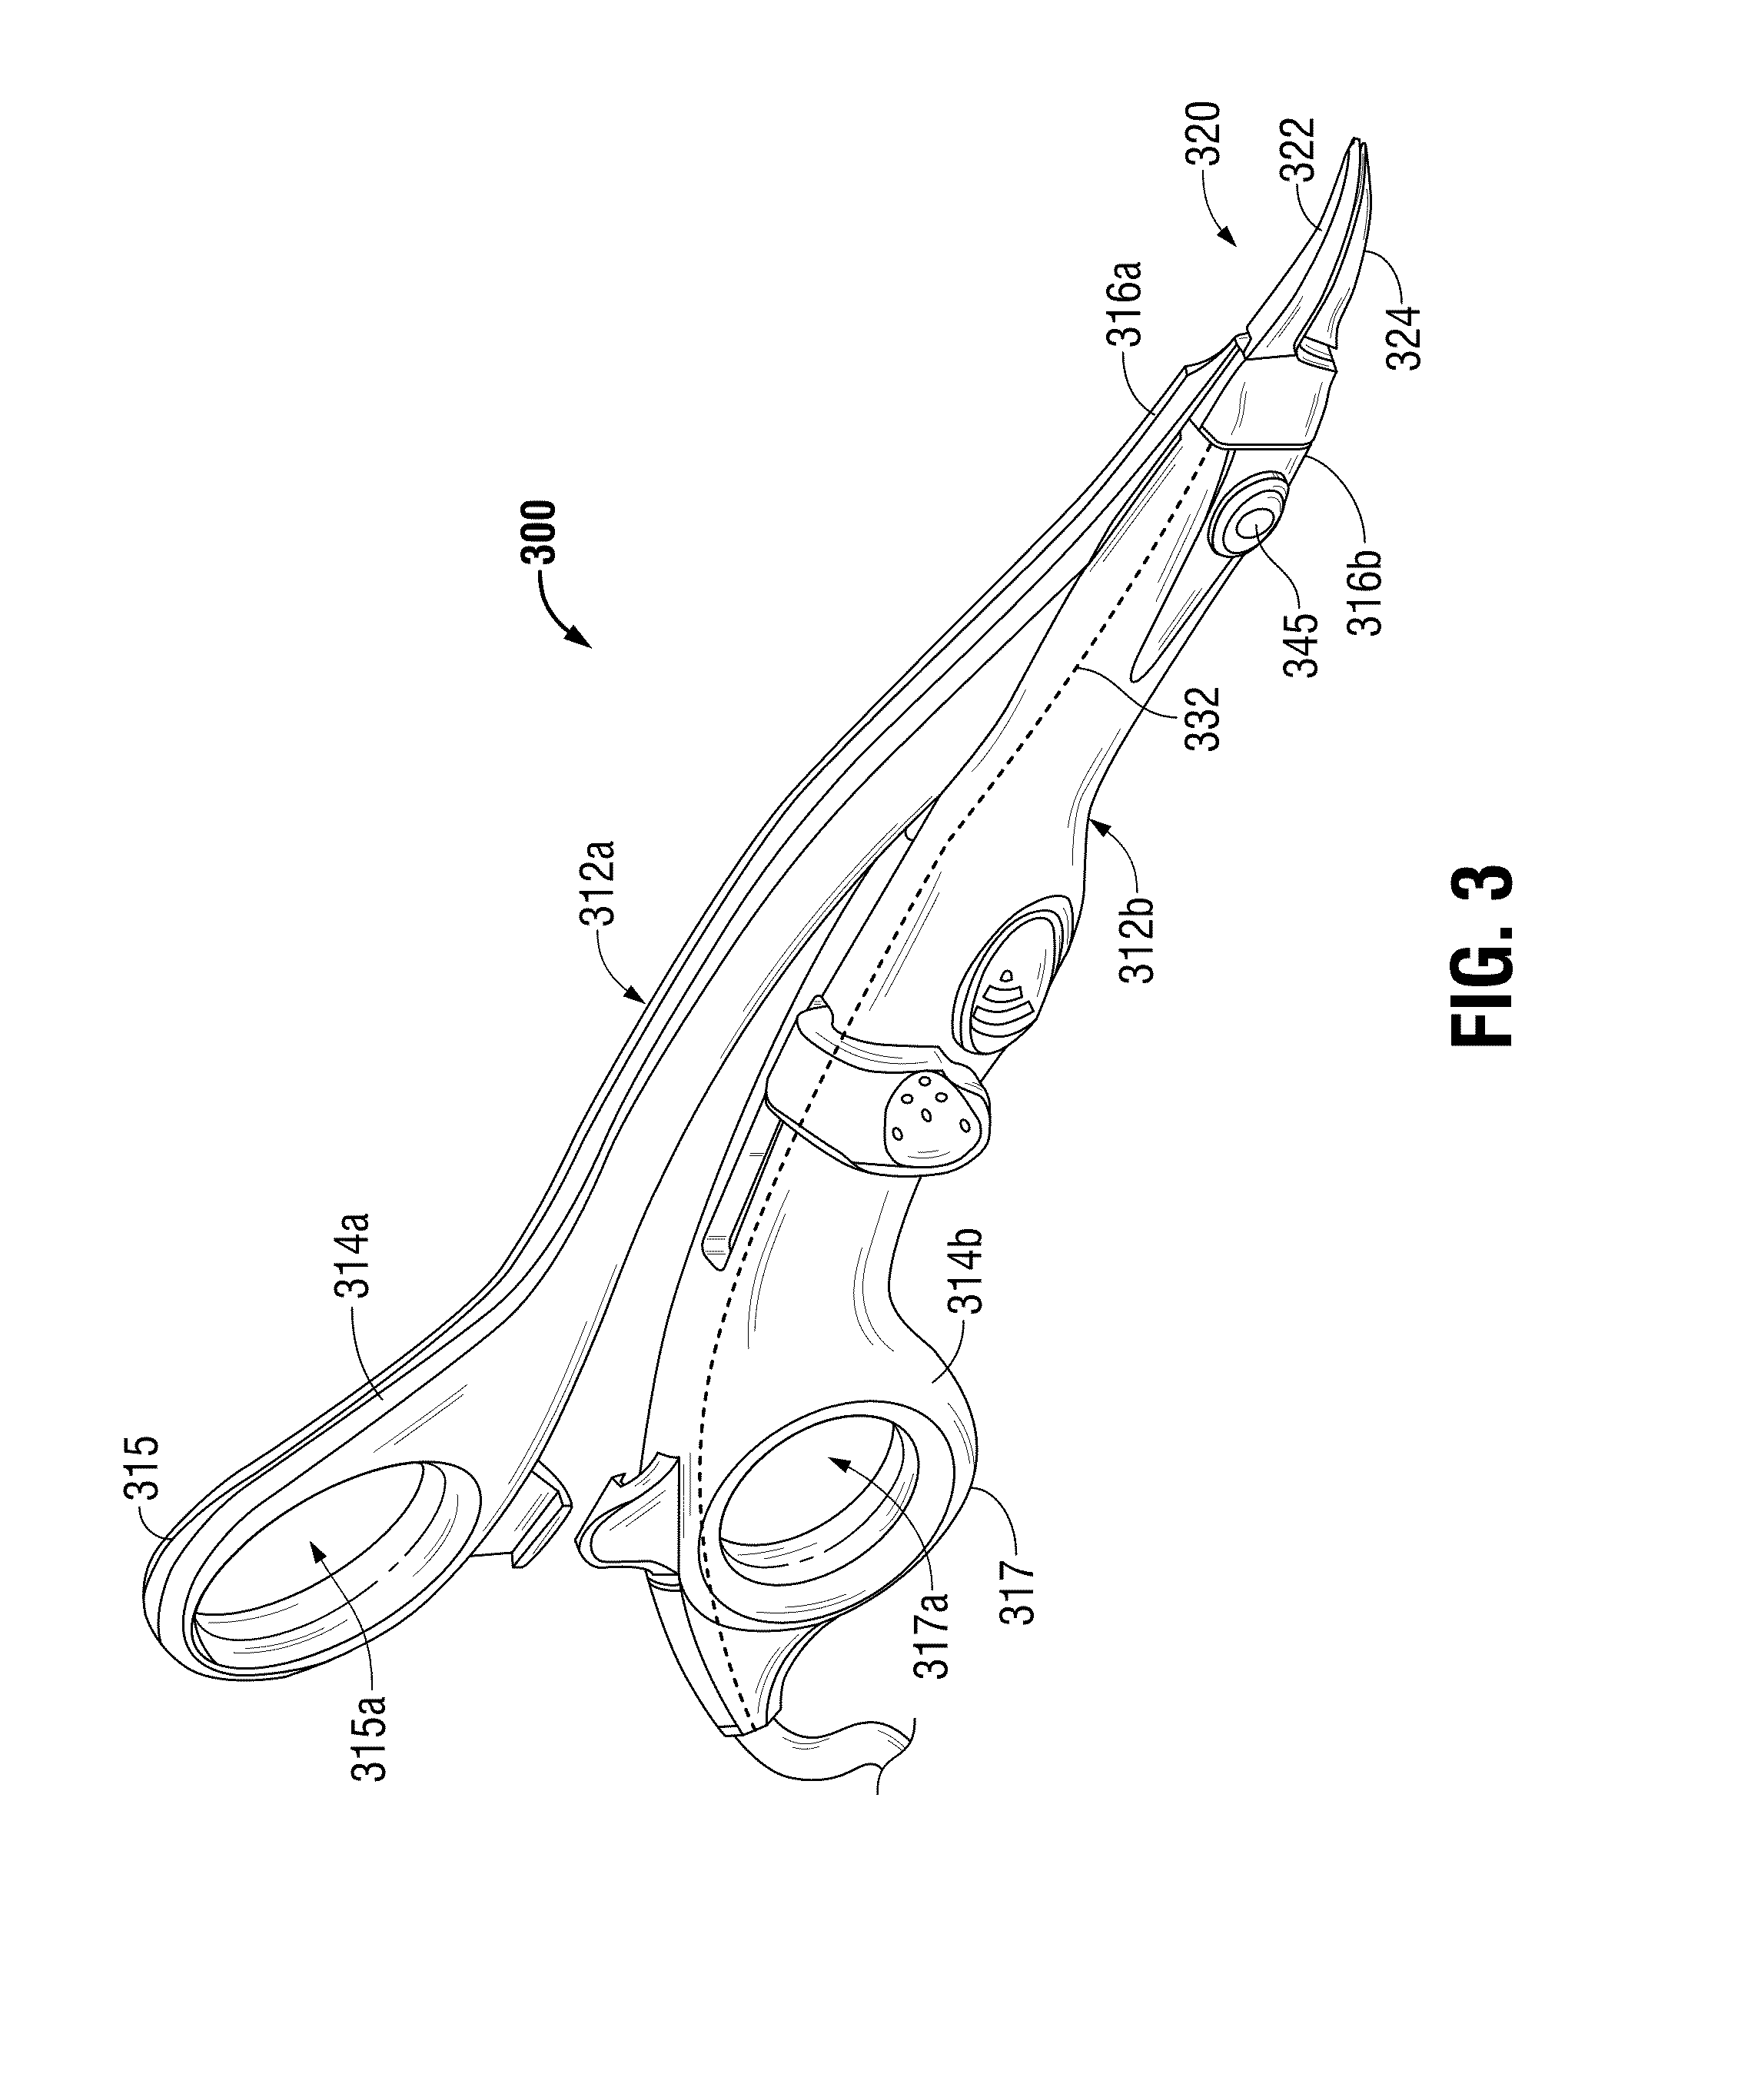 Temperature-sensing electrically-conductive tissue-contacting plate configured for use in an electrosurgical jaw member, electrosurgical system including same, and methods of controlling vessel sealing using same